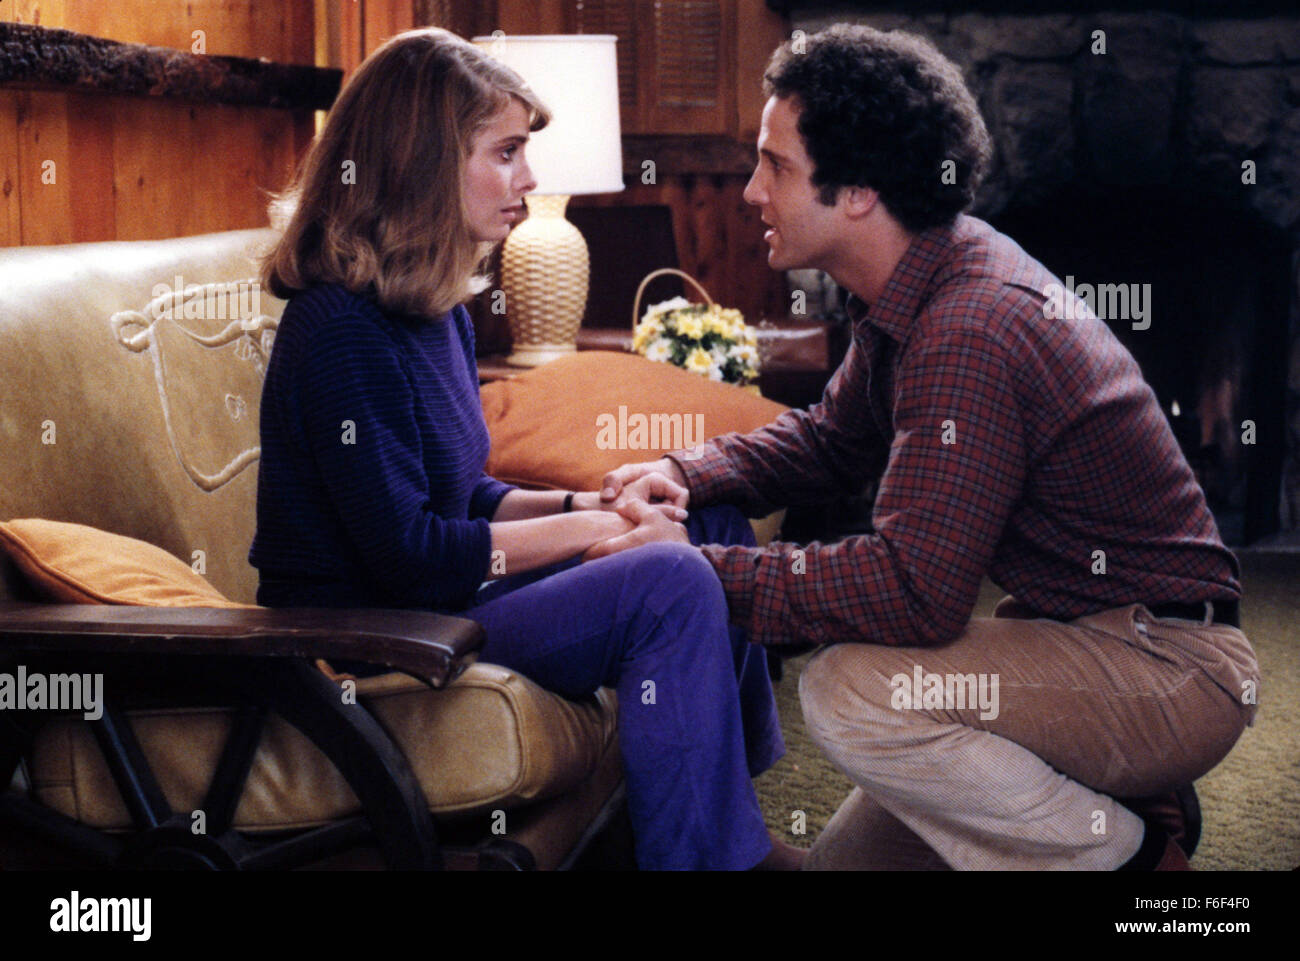 RELEASE DATE: March 13, 1981  MOVIE TITLE: Modern Romance  STUDIO: Columbia Pictures  DIRECTOR: Albert Brooks  PLOT: Albert Brooks directs himself as a successful film editor with far too many issues that affects the relationship between him and his remarkably patient girlfriend  PICTURED: KATHRYN HARROLD as Mary Harvard and ALBERT BROOKS as Robert Cole  (Credit Image: c Columbia Pictures/Entertainment Pictures) Stock Photo